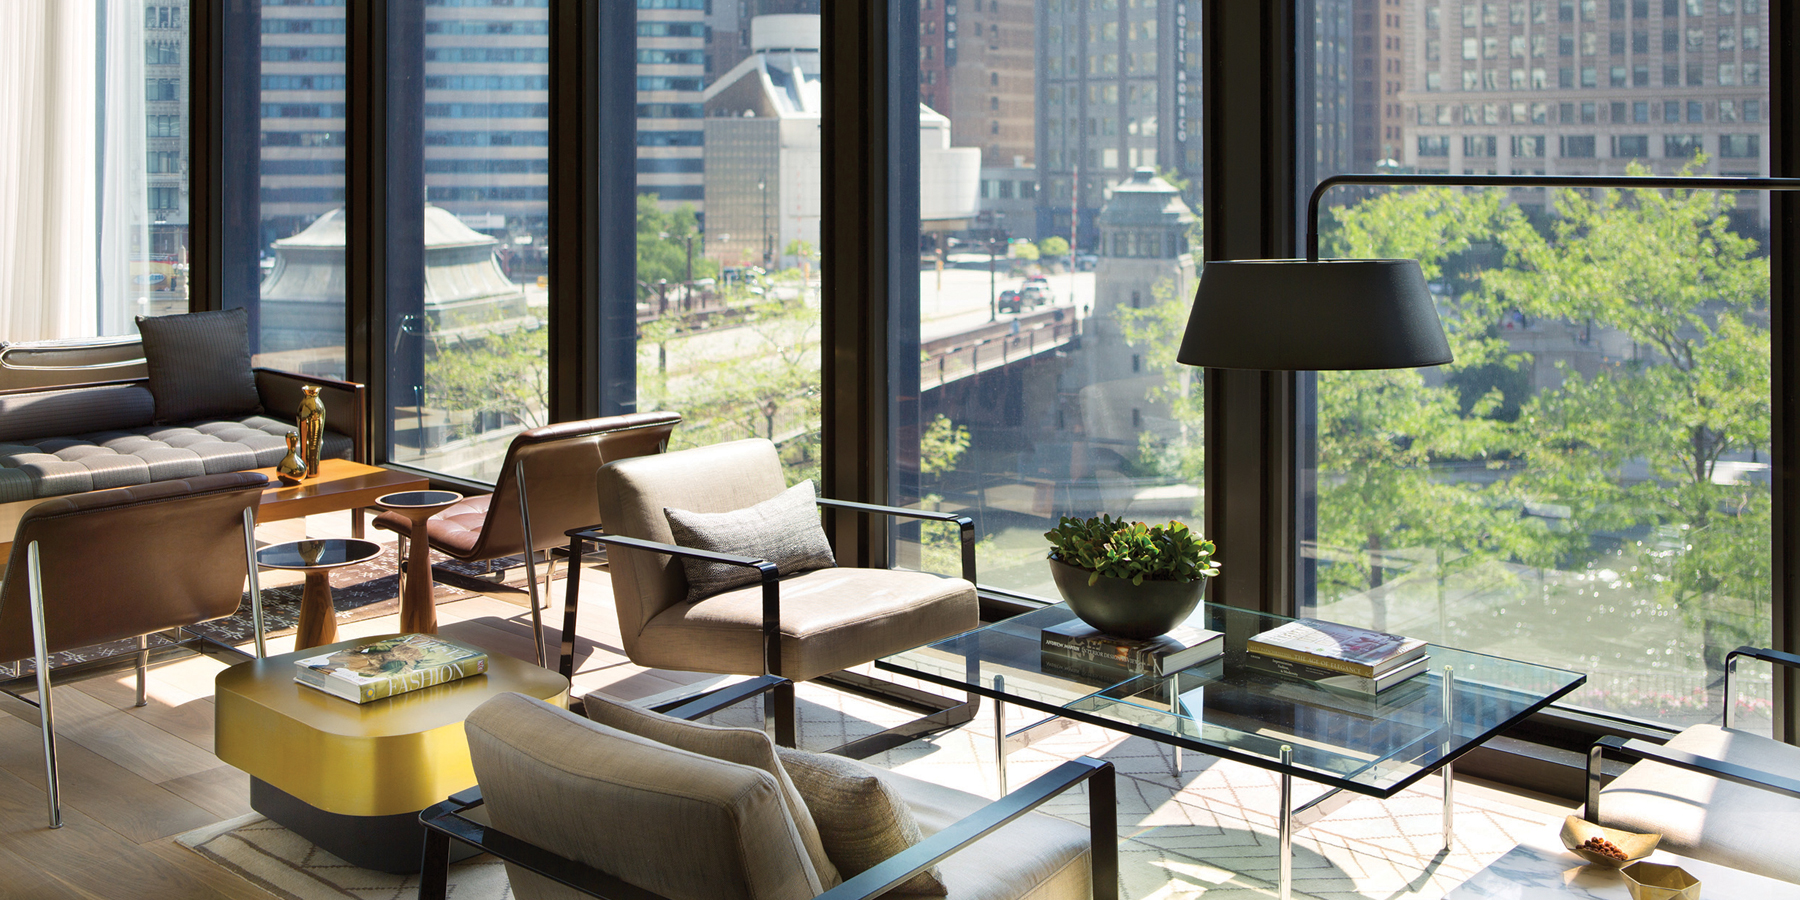 Chicago Hotels Find The Best Places To Stay Choose Chicago